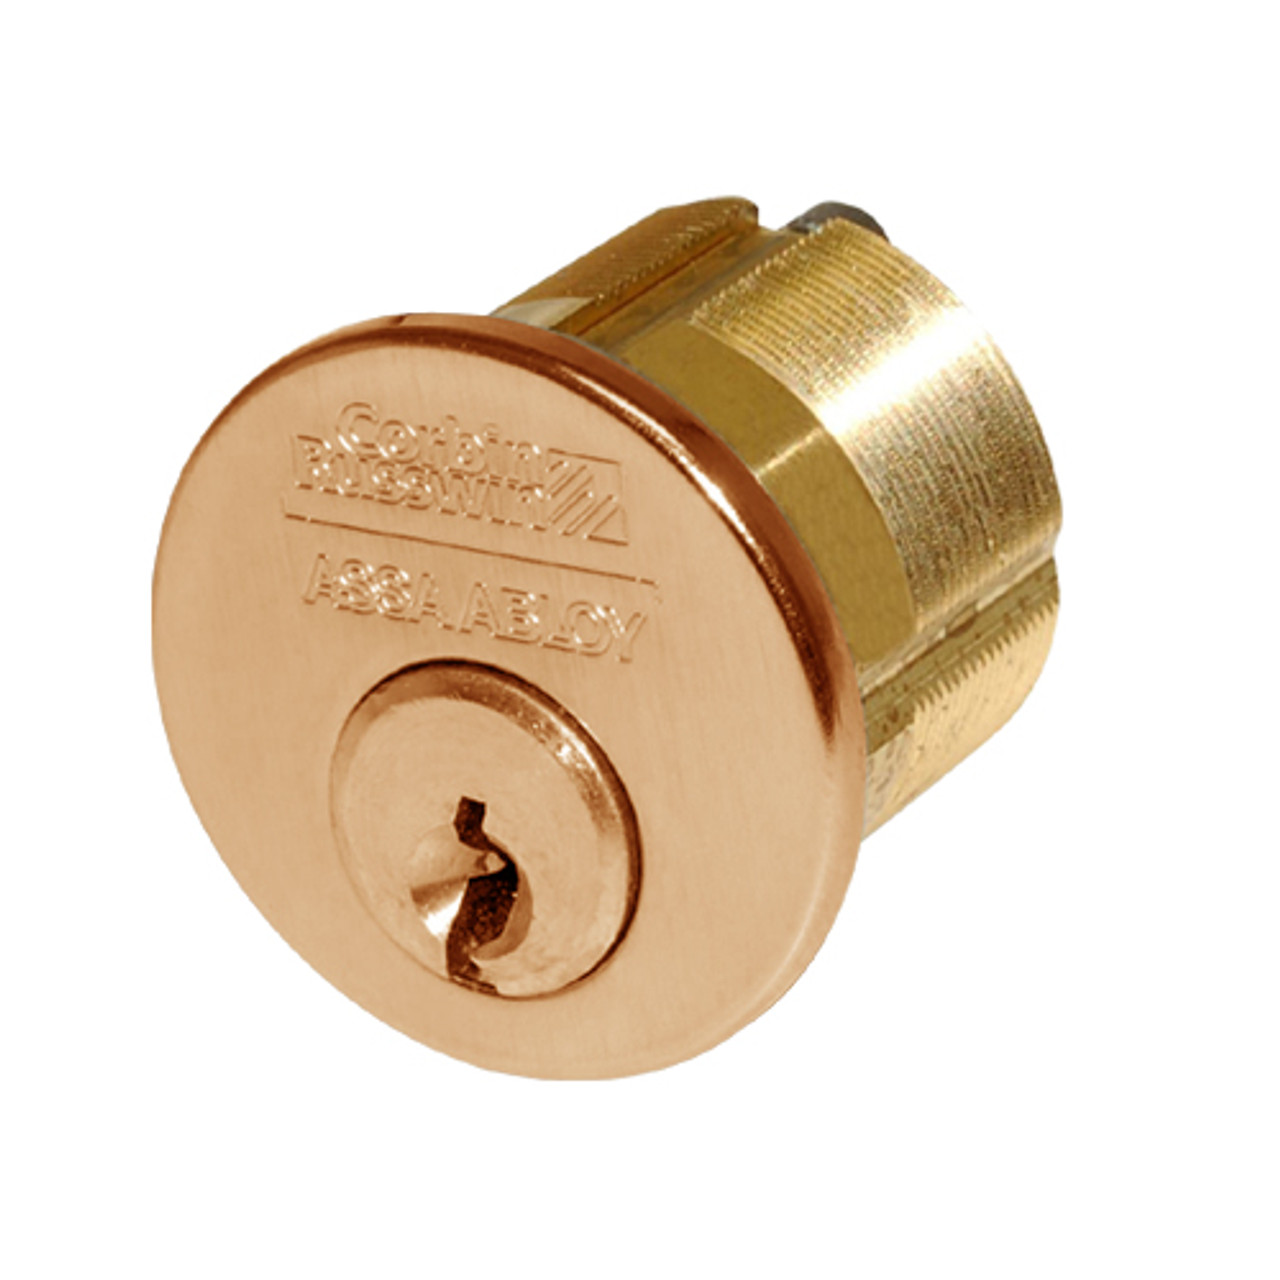 CR1000-118-A01-6-27A1-612 Corbin Conventional Mortise Cylinder for Mortise Lock and DL3000 Deadlocks with Cloverleaf Cam in Satin Bronze Finish